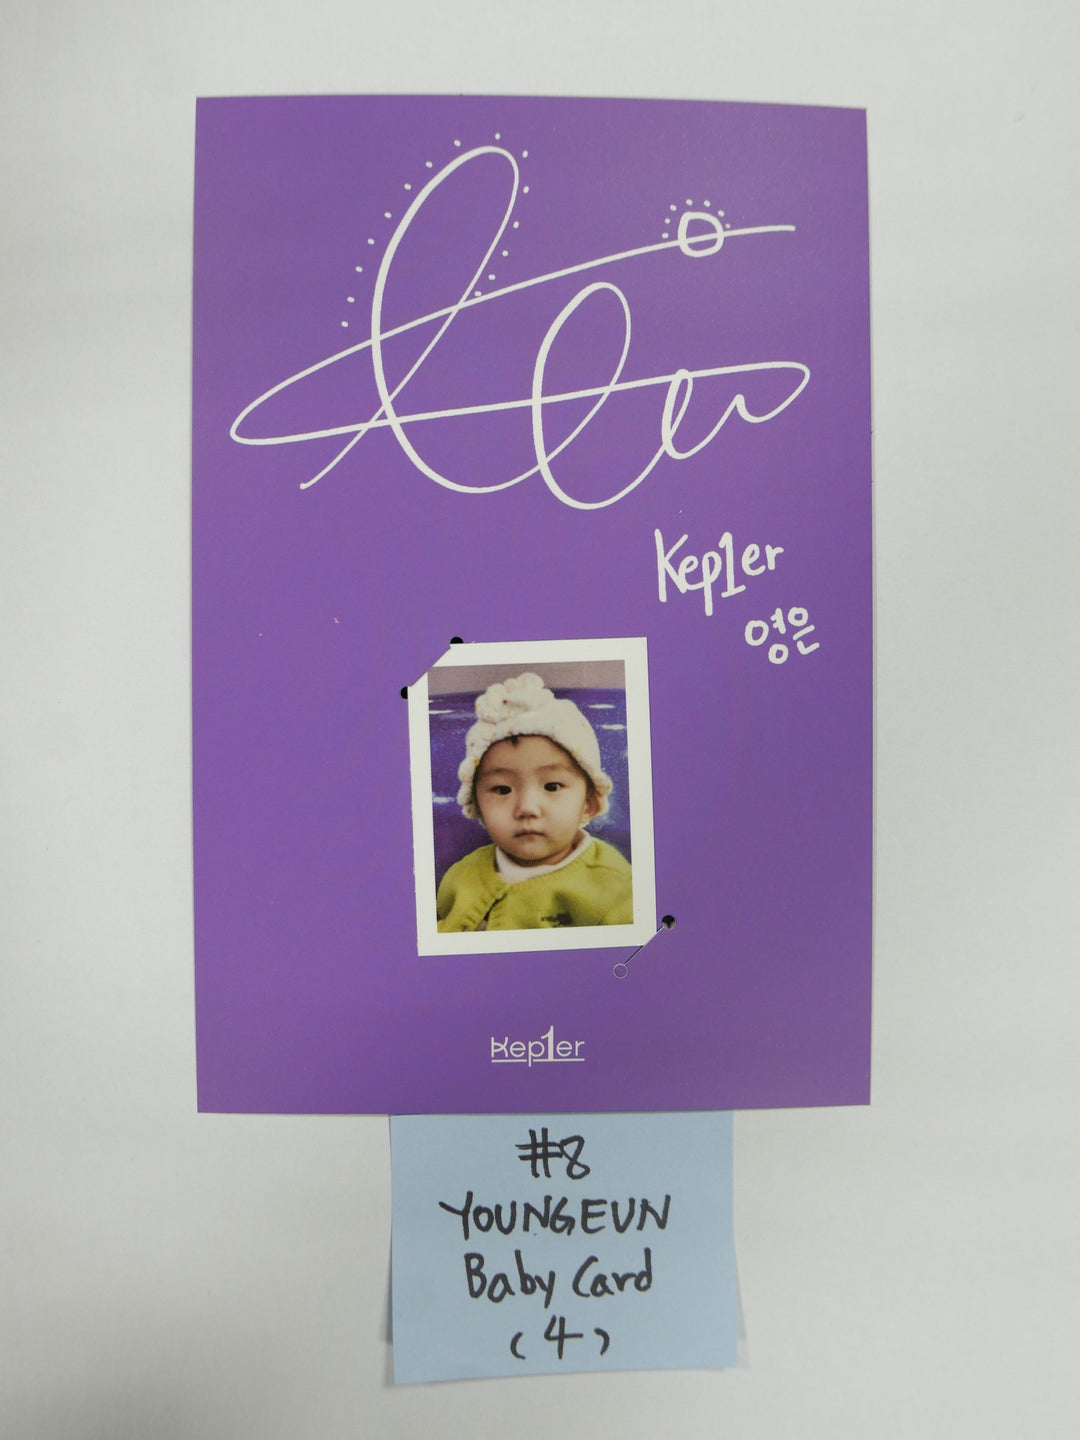 Kep1er "FIRST IMPACT" 1st - Pre-Order Benefit Baby Photcard [Updated 1/10]